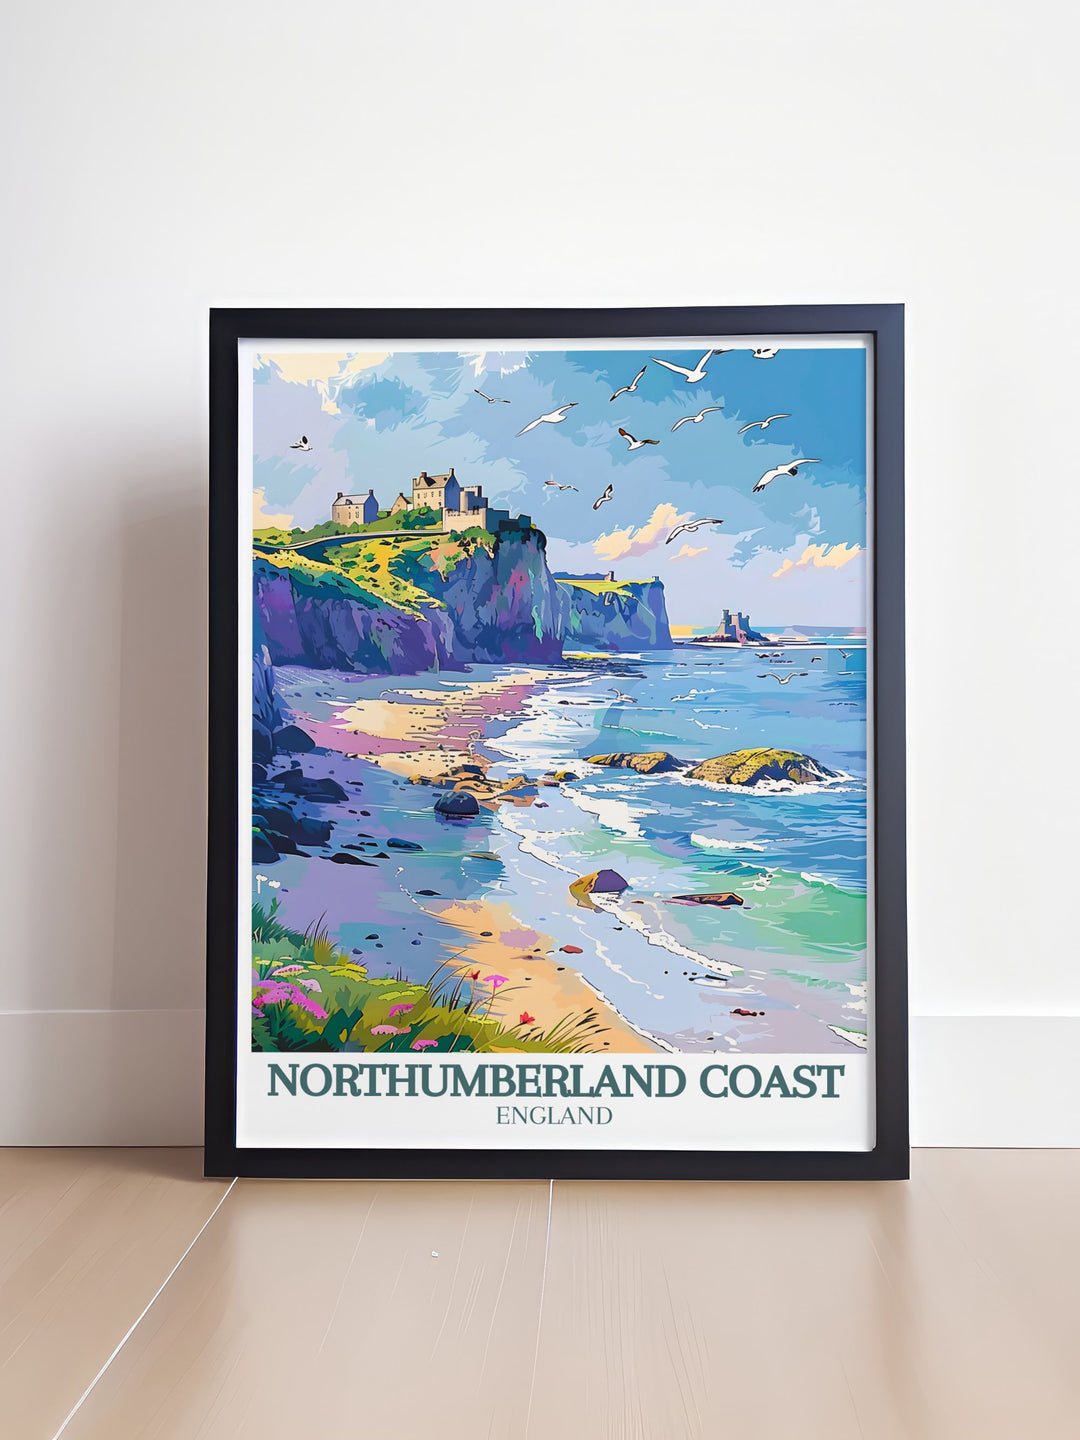 Framed Print of Bamburgh Castle and Dunstanburgh Castle set against the beautiful Northumberland Coast a perfect addition for those who admire historical landmarks and natural scenery